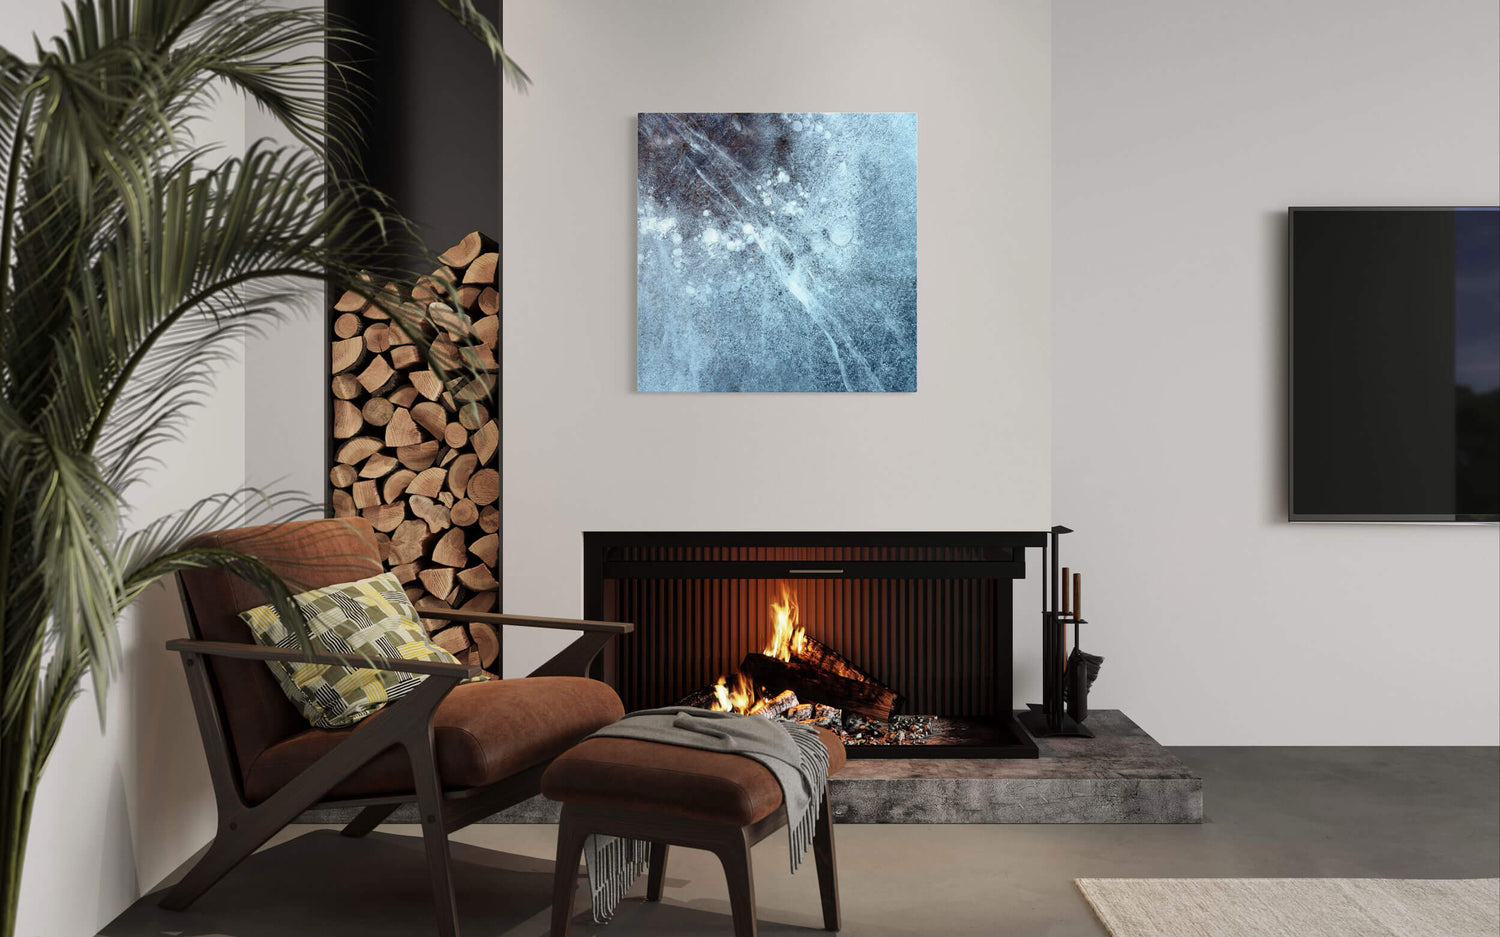 A piece of Rocky Mountain National Park art showing a Dream Lake picture hangs in a living room.